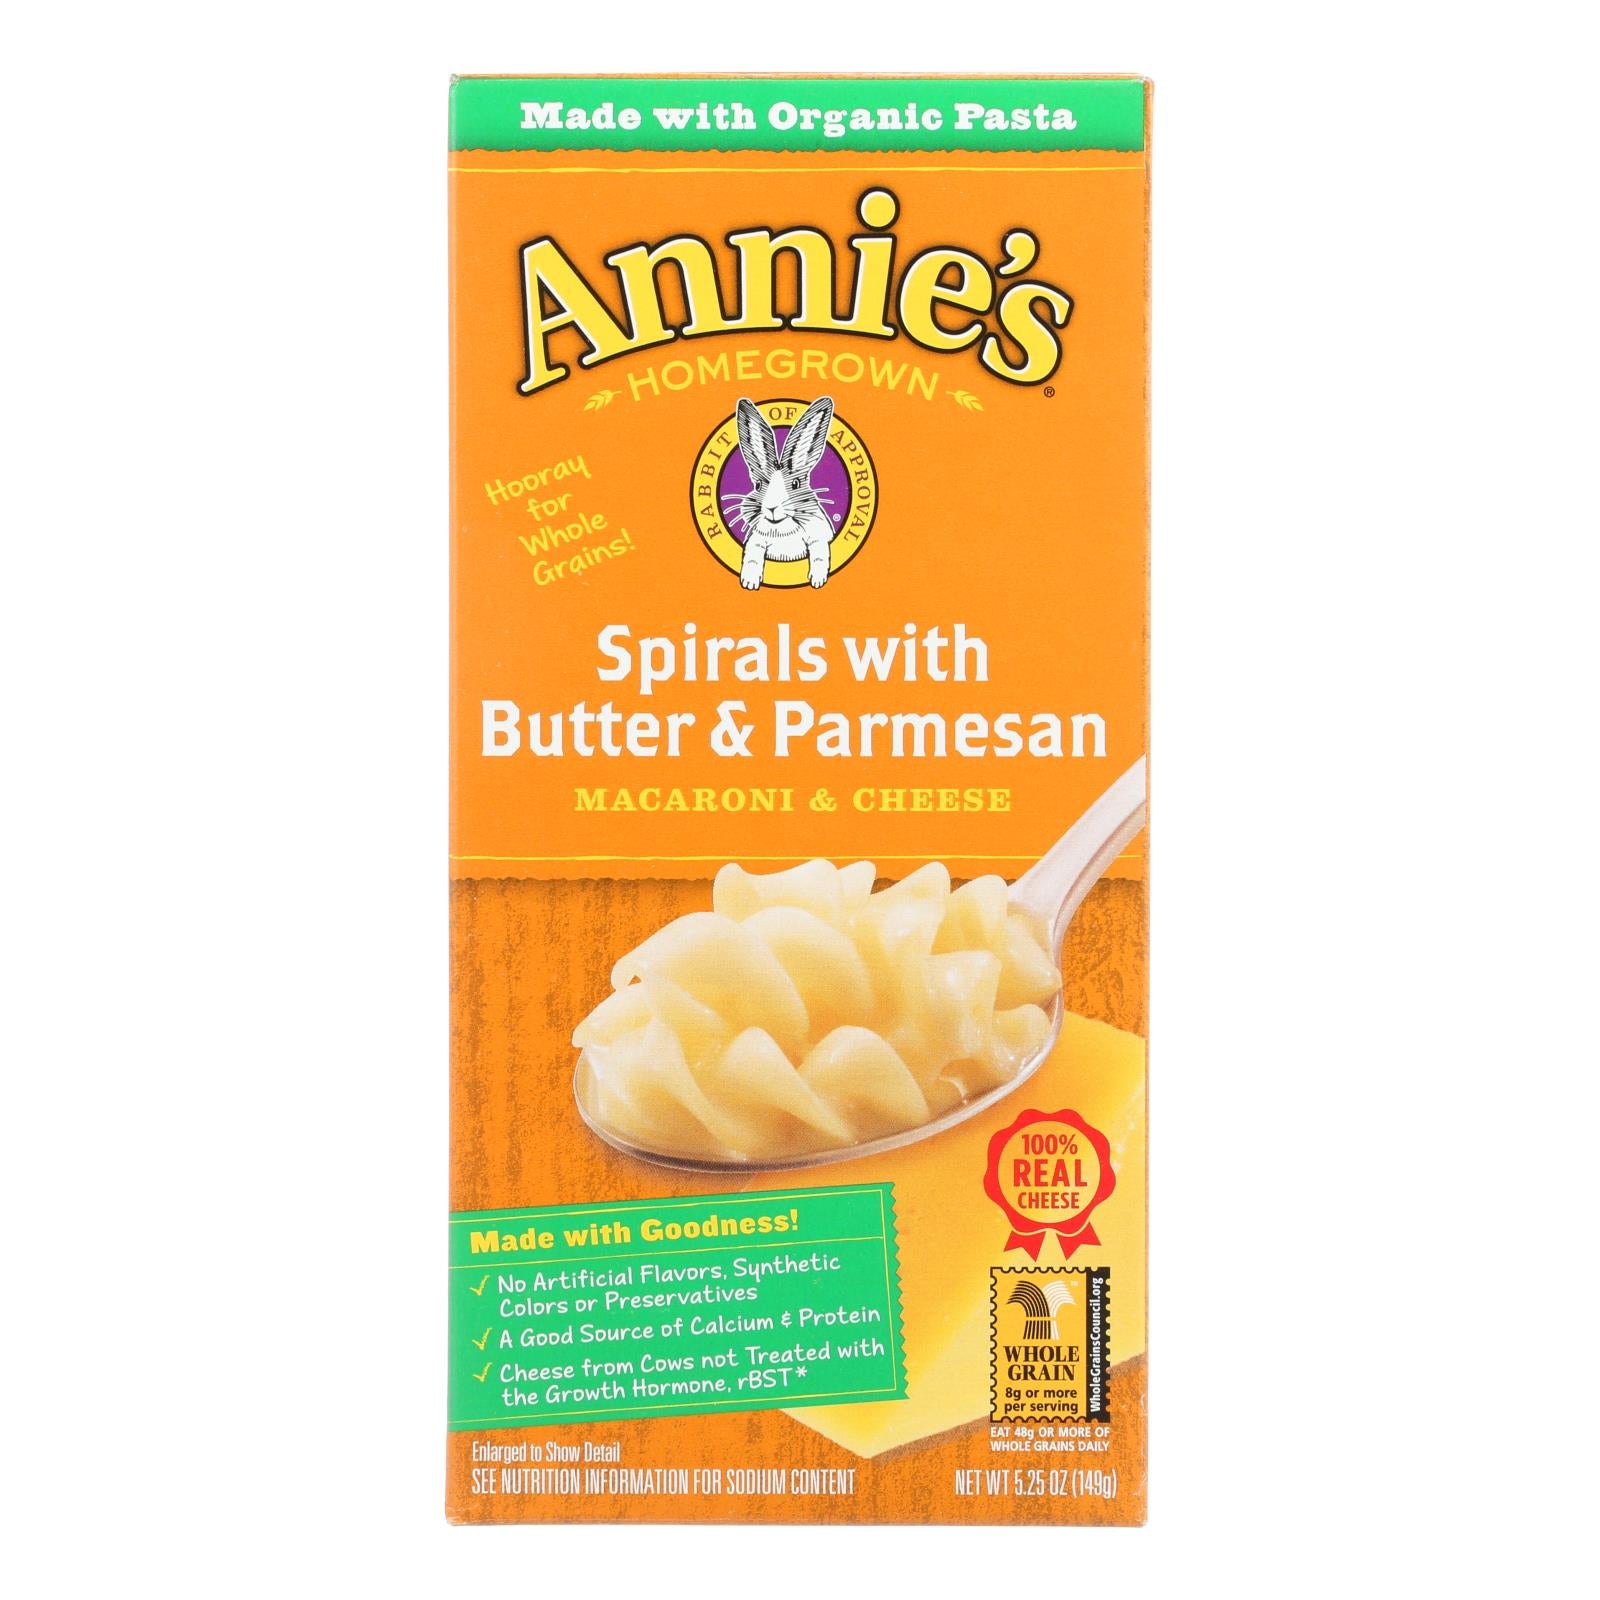 Annie'S Homegrown, Annie's Homegrown Spirals with Butter and Parmesan Macaroni and Cheese - Case of 12 - 5.25 oz. (Pack of 12)